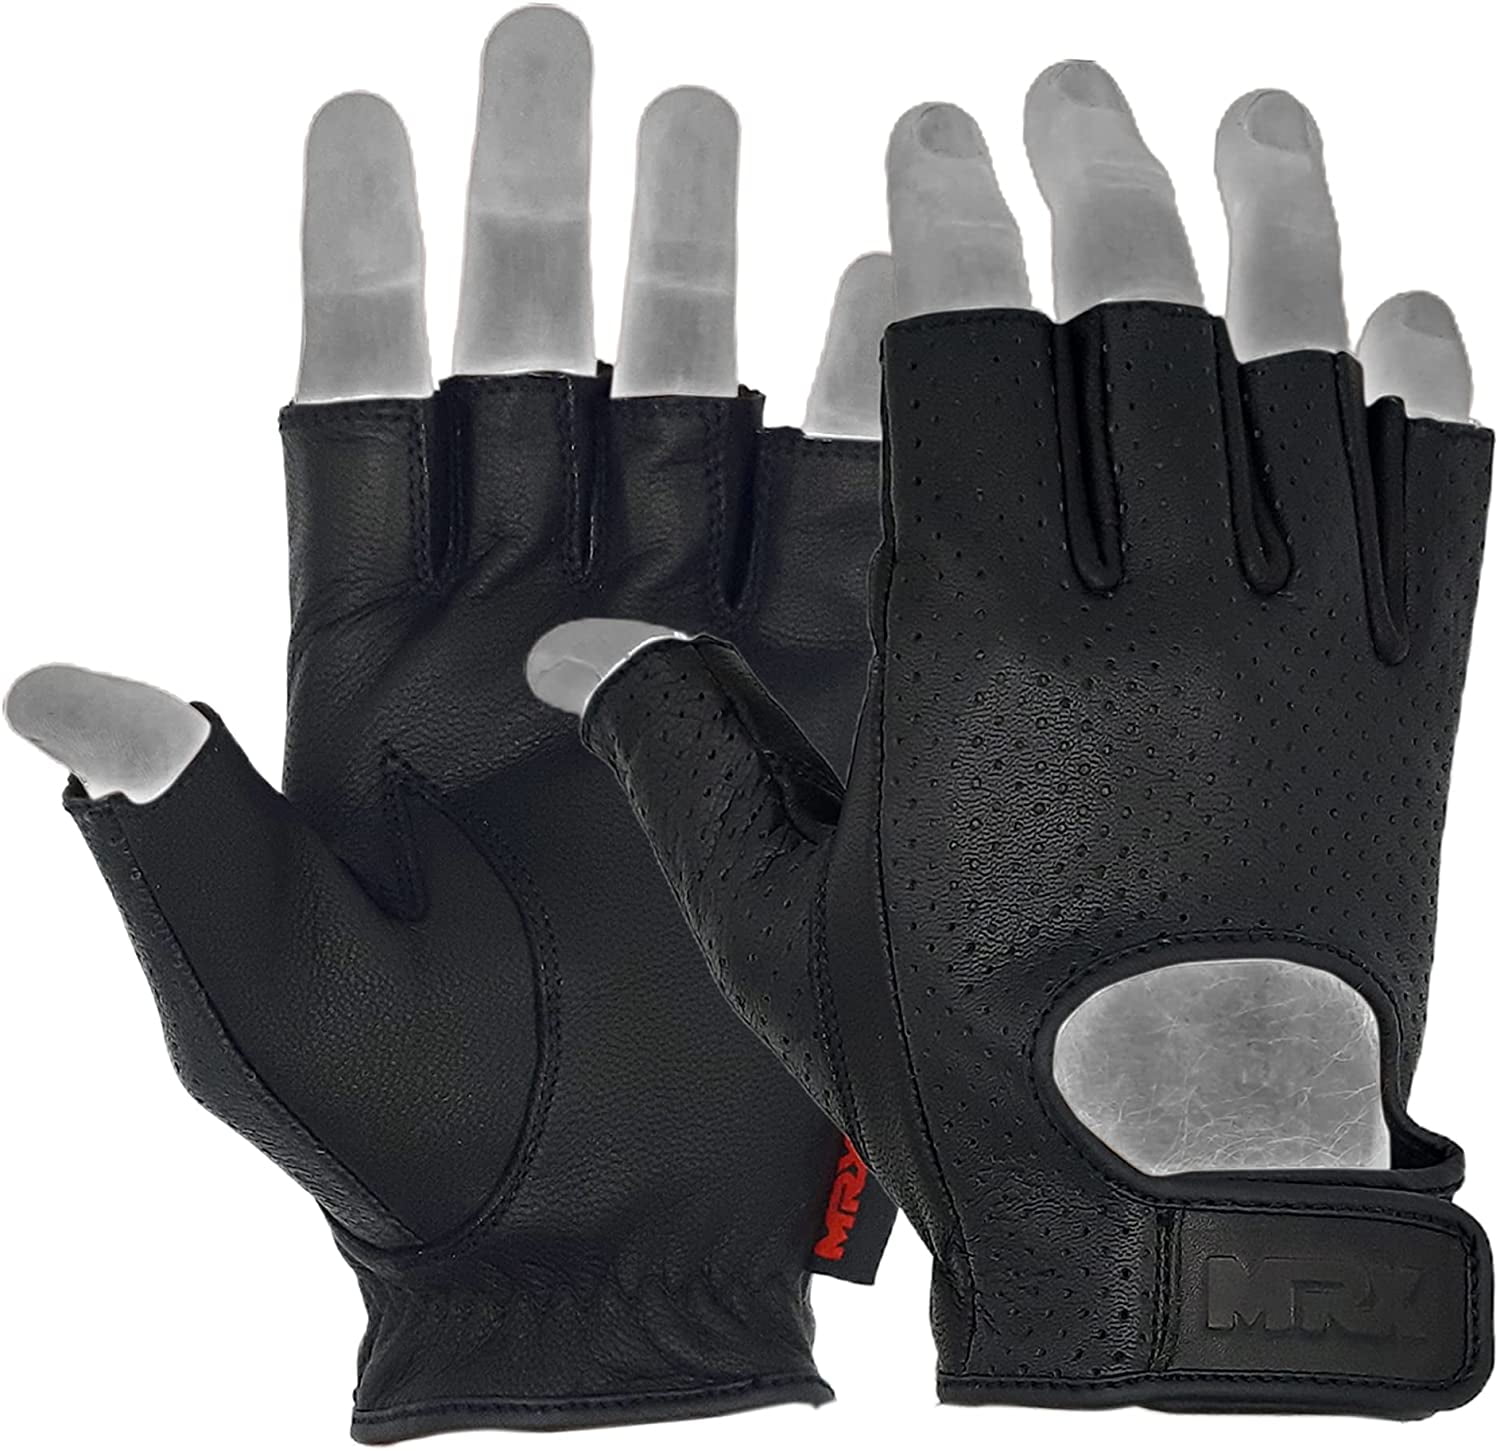 Soft comfortable Synthetic Leather Fingerless Motorcycle Driving Gloves unisex